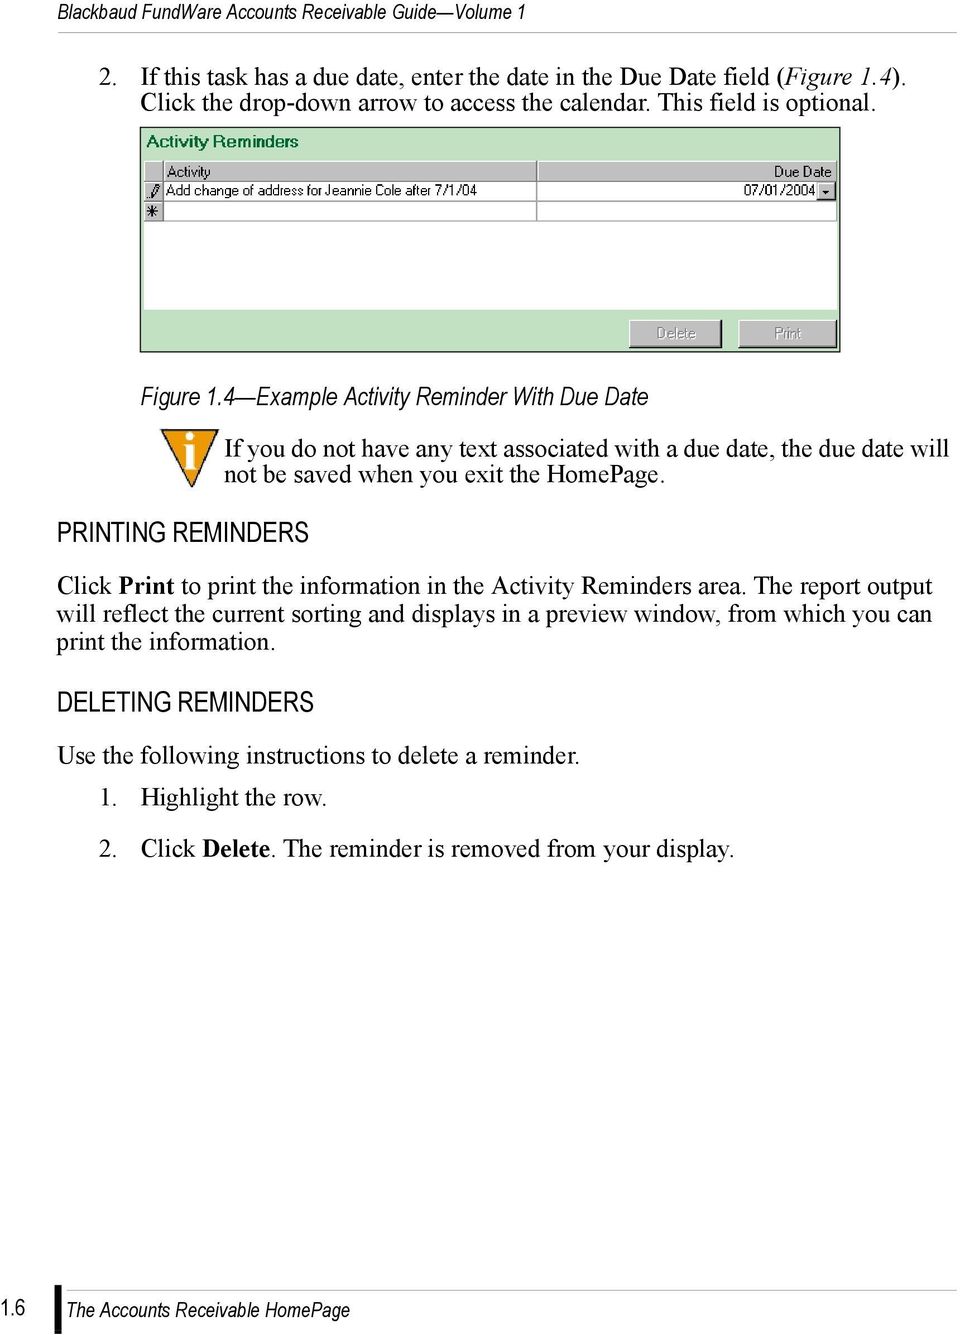 4 Example Activity Reminder With Due Date PRINTING REMINDERS If you do not have any text associated with a due date, the due date will not be saved when you exit the HomePage.